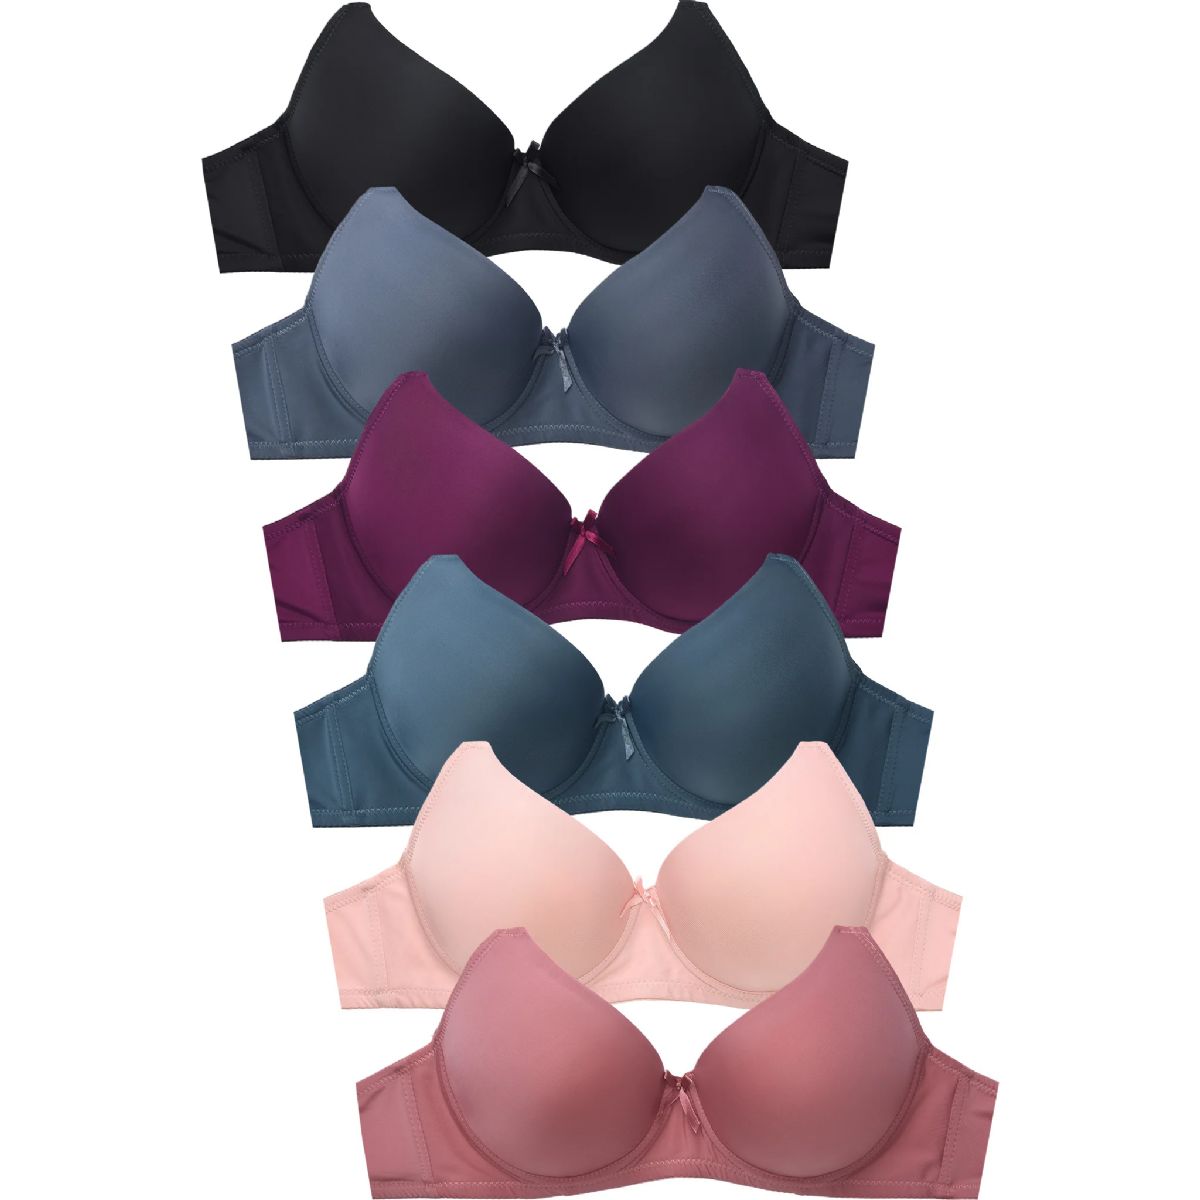 144 Pieces of Sofra Ladies Full Cup Plain Dd Cup Bra